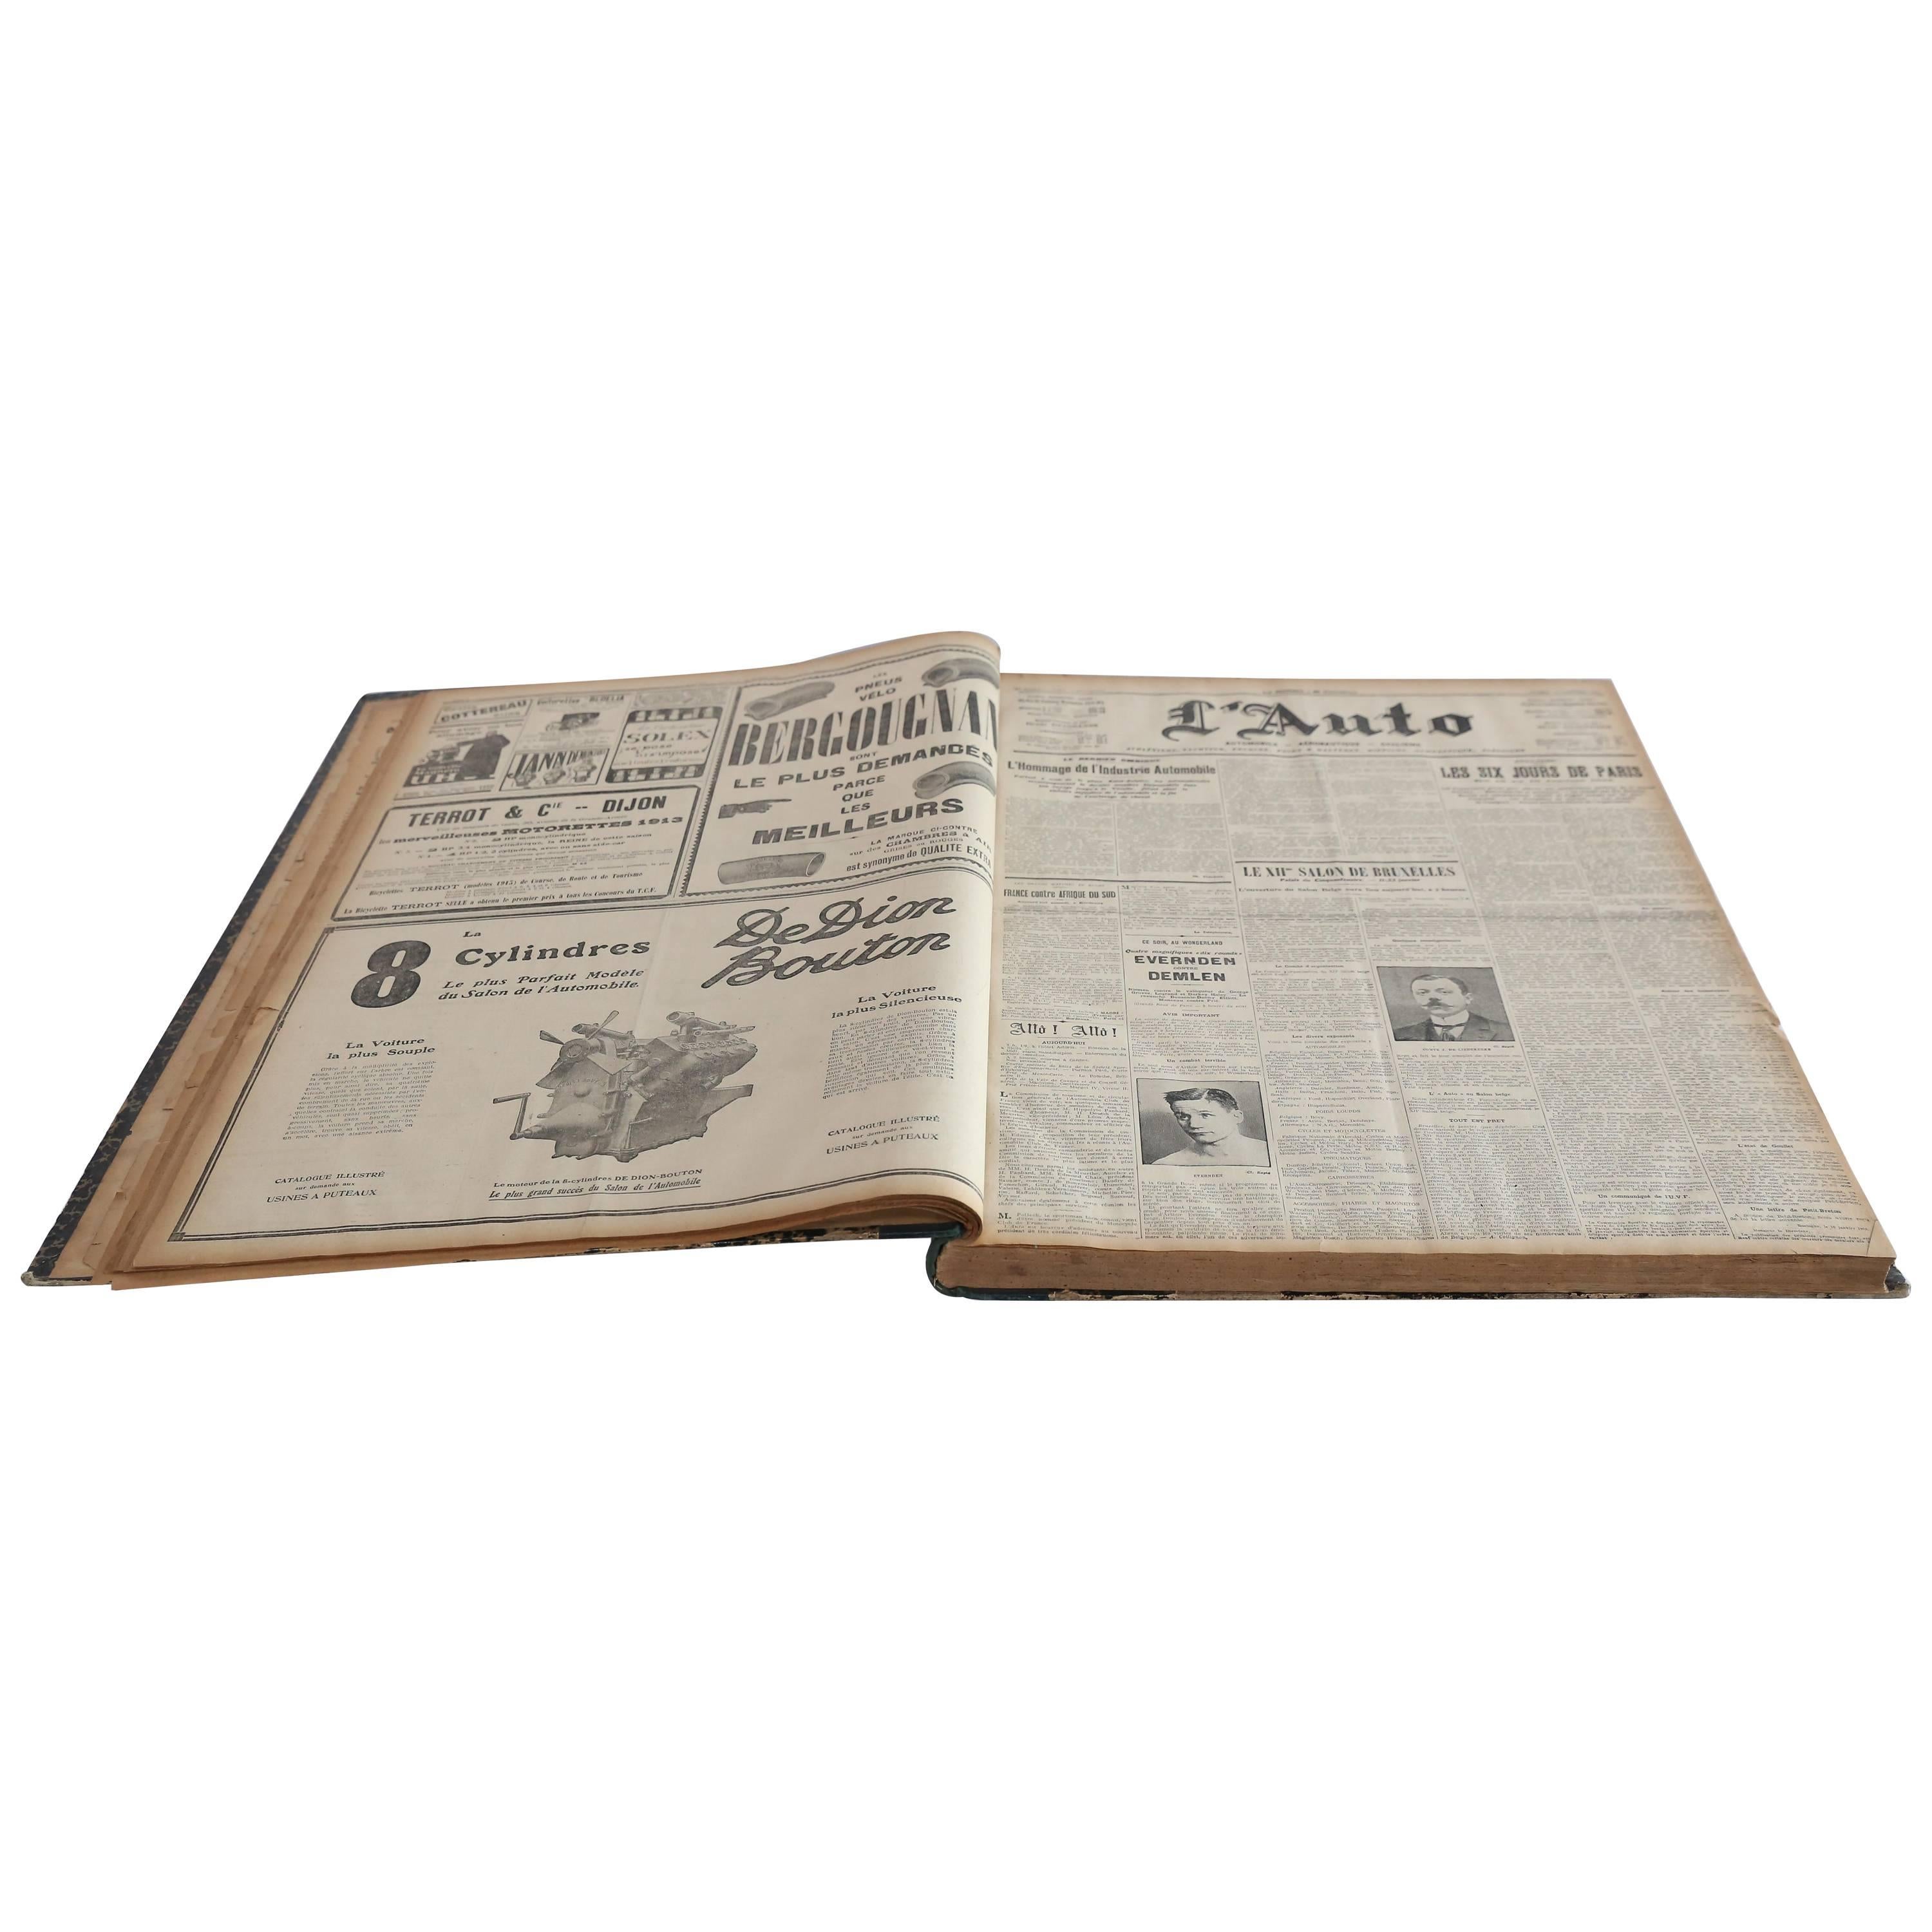 Bound Editions of L'Auto Newspaper, France, 1913